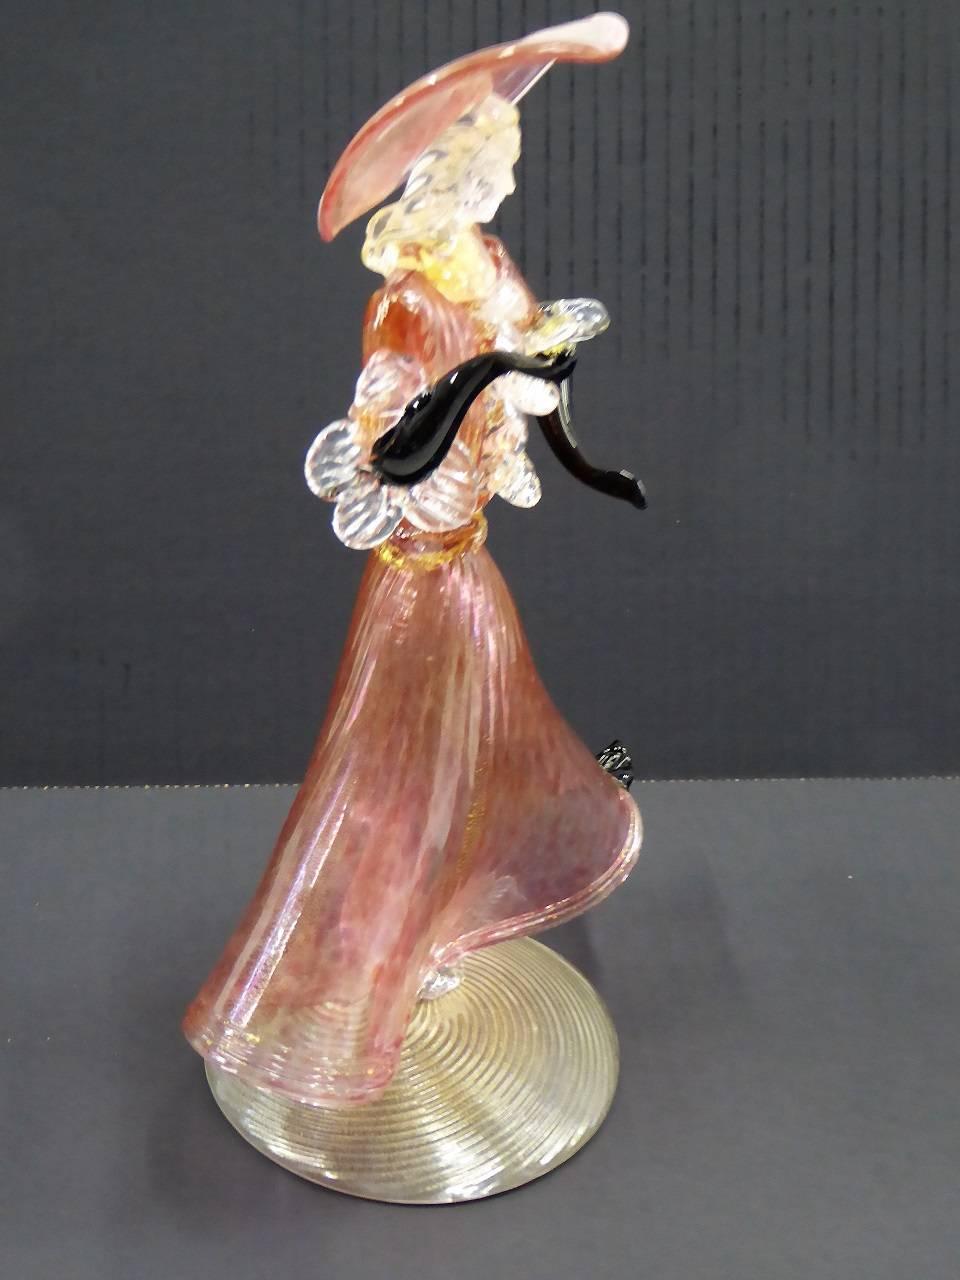 REDUCED FROM $450....Lovely Vintage 1950s Venetian blown glass figurine of a dancing courtesan with a large hat and flowing dress. Murano techniques of glass with gold inclusions throughout and a dress and hat of pale plum murine on a base of gold